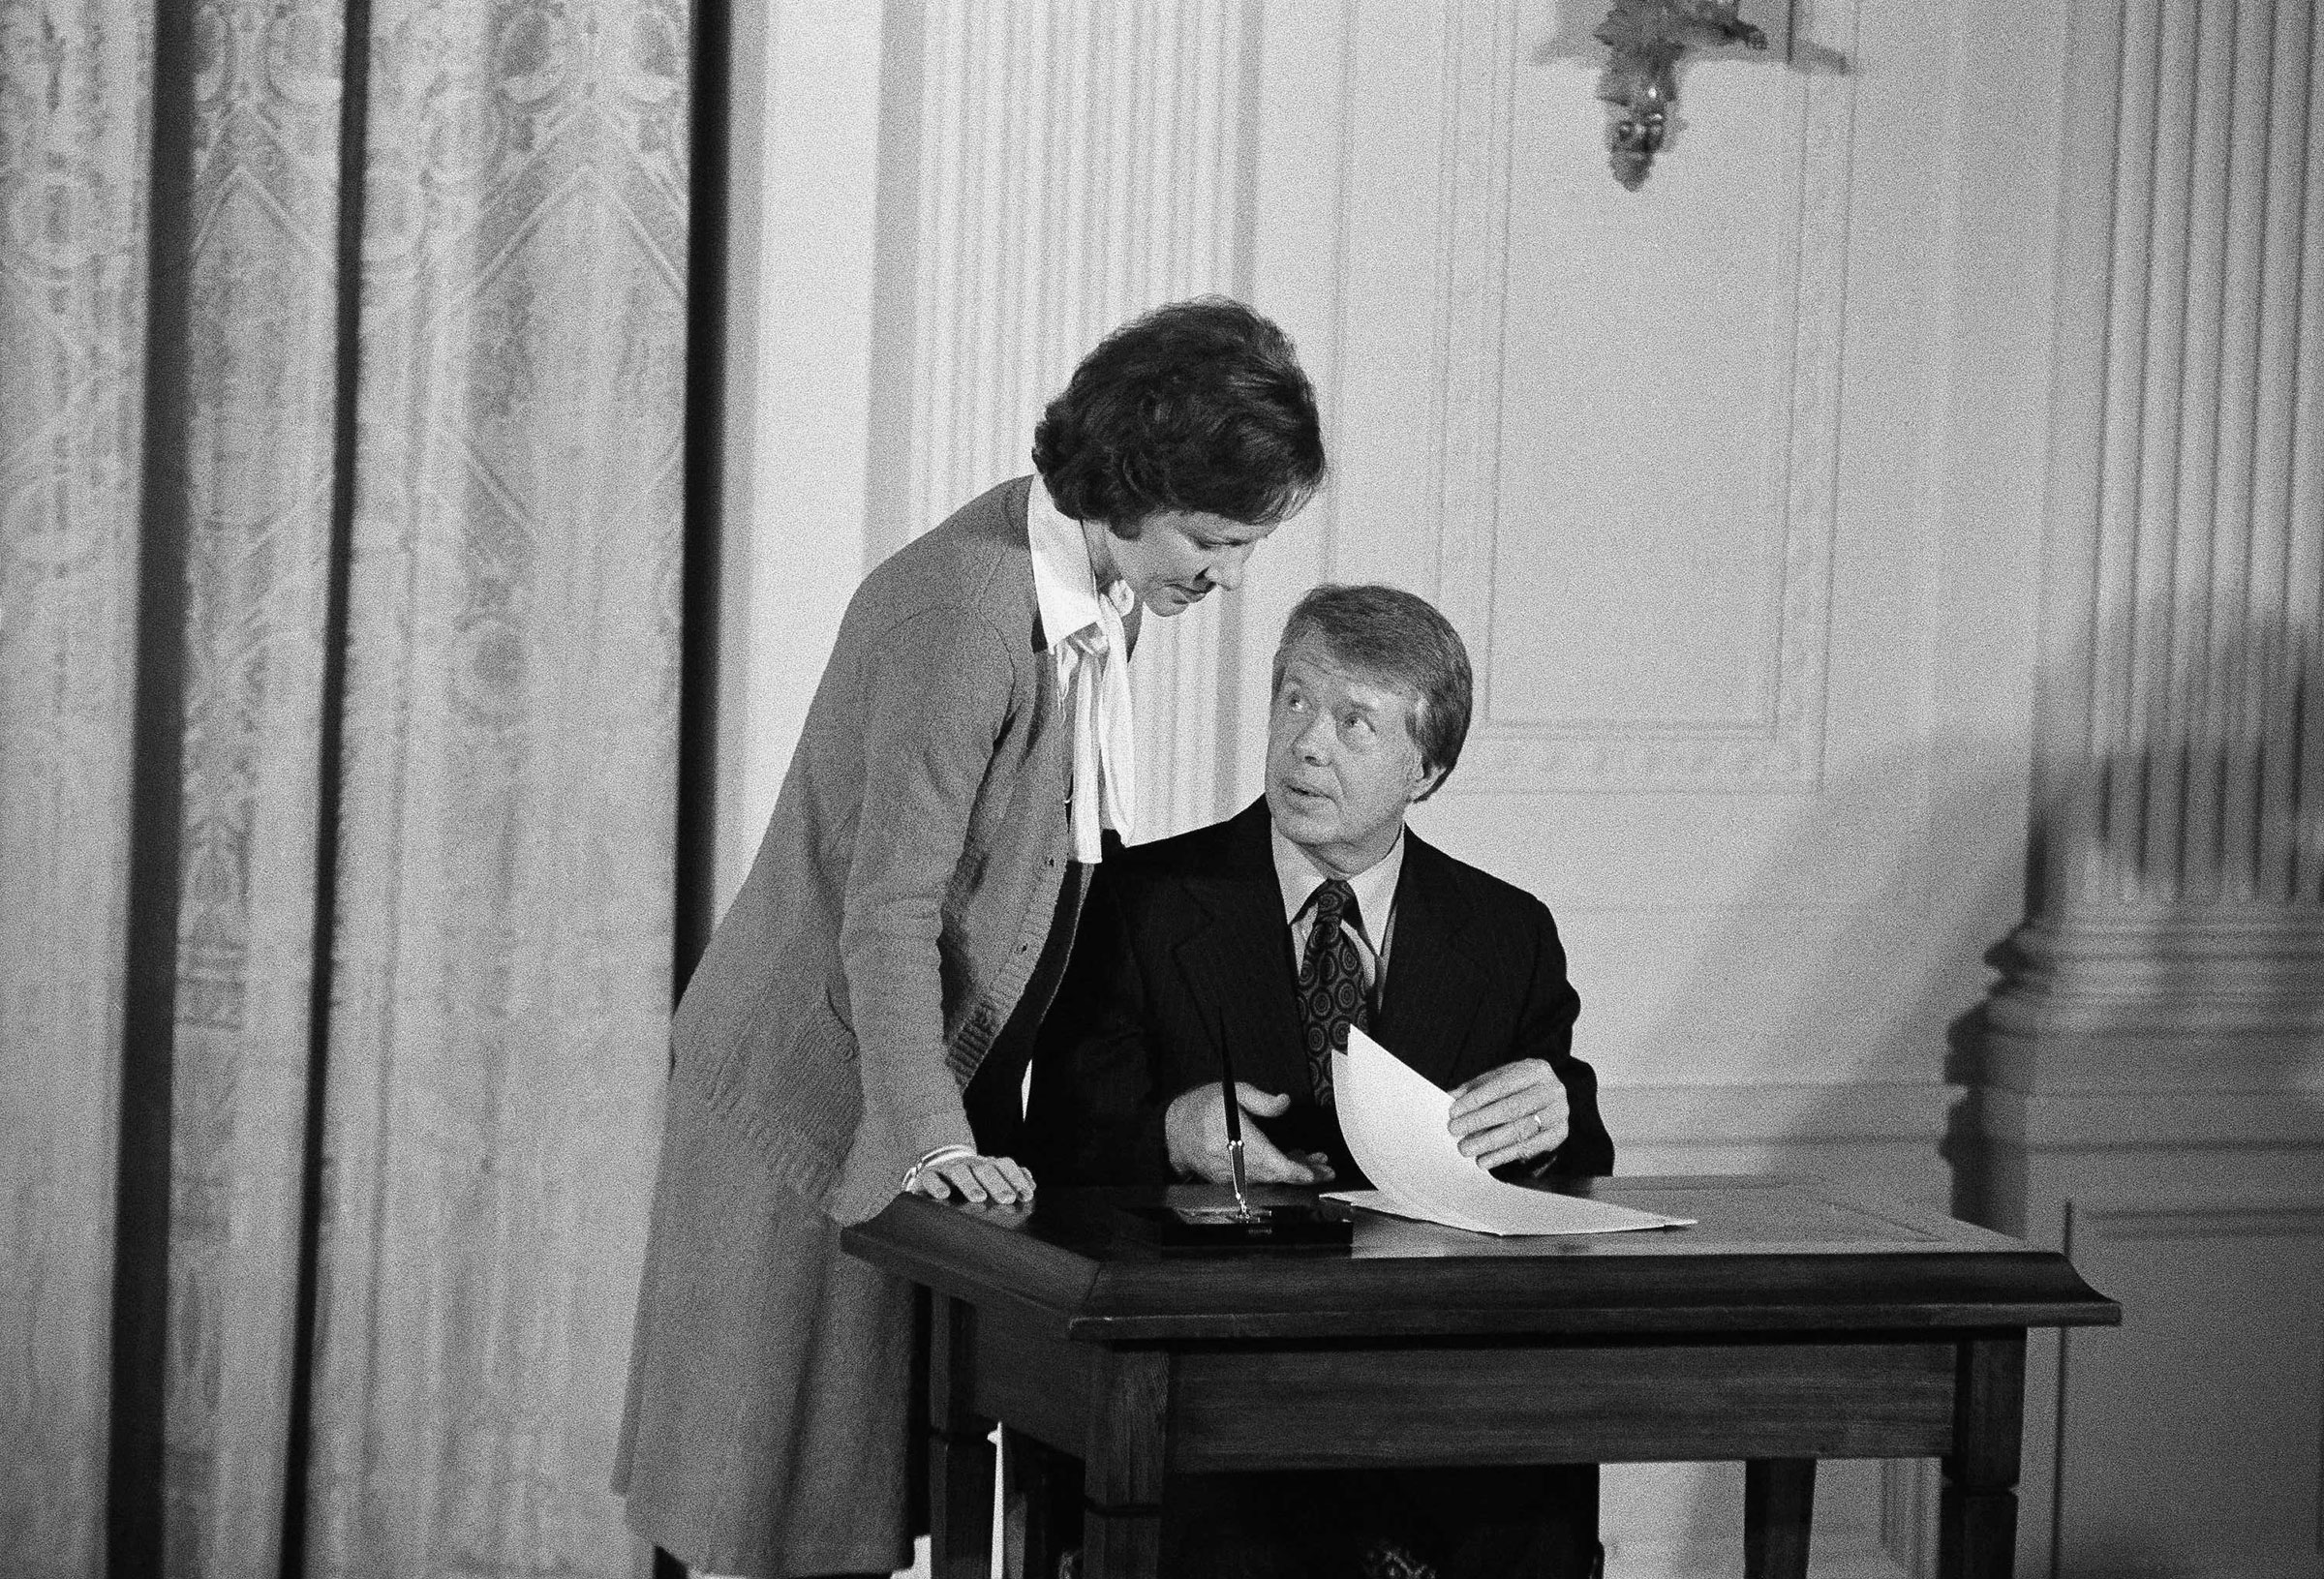 President Jimmy Carter stops to talk with first lady Rosalynn Carter prior to signing an executive order establishing the Presidential Commission on Mental Health at the White House on Feb. 17, 1977.